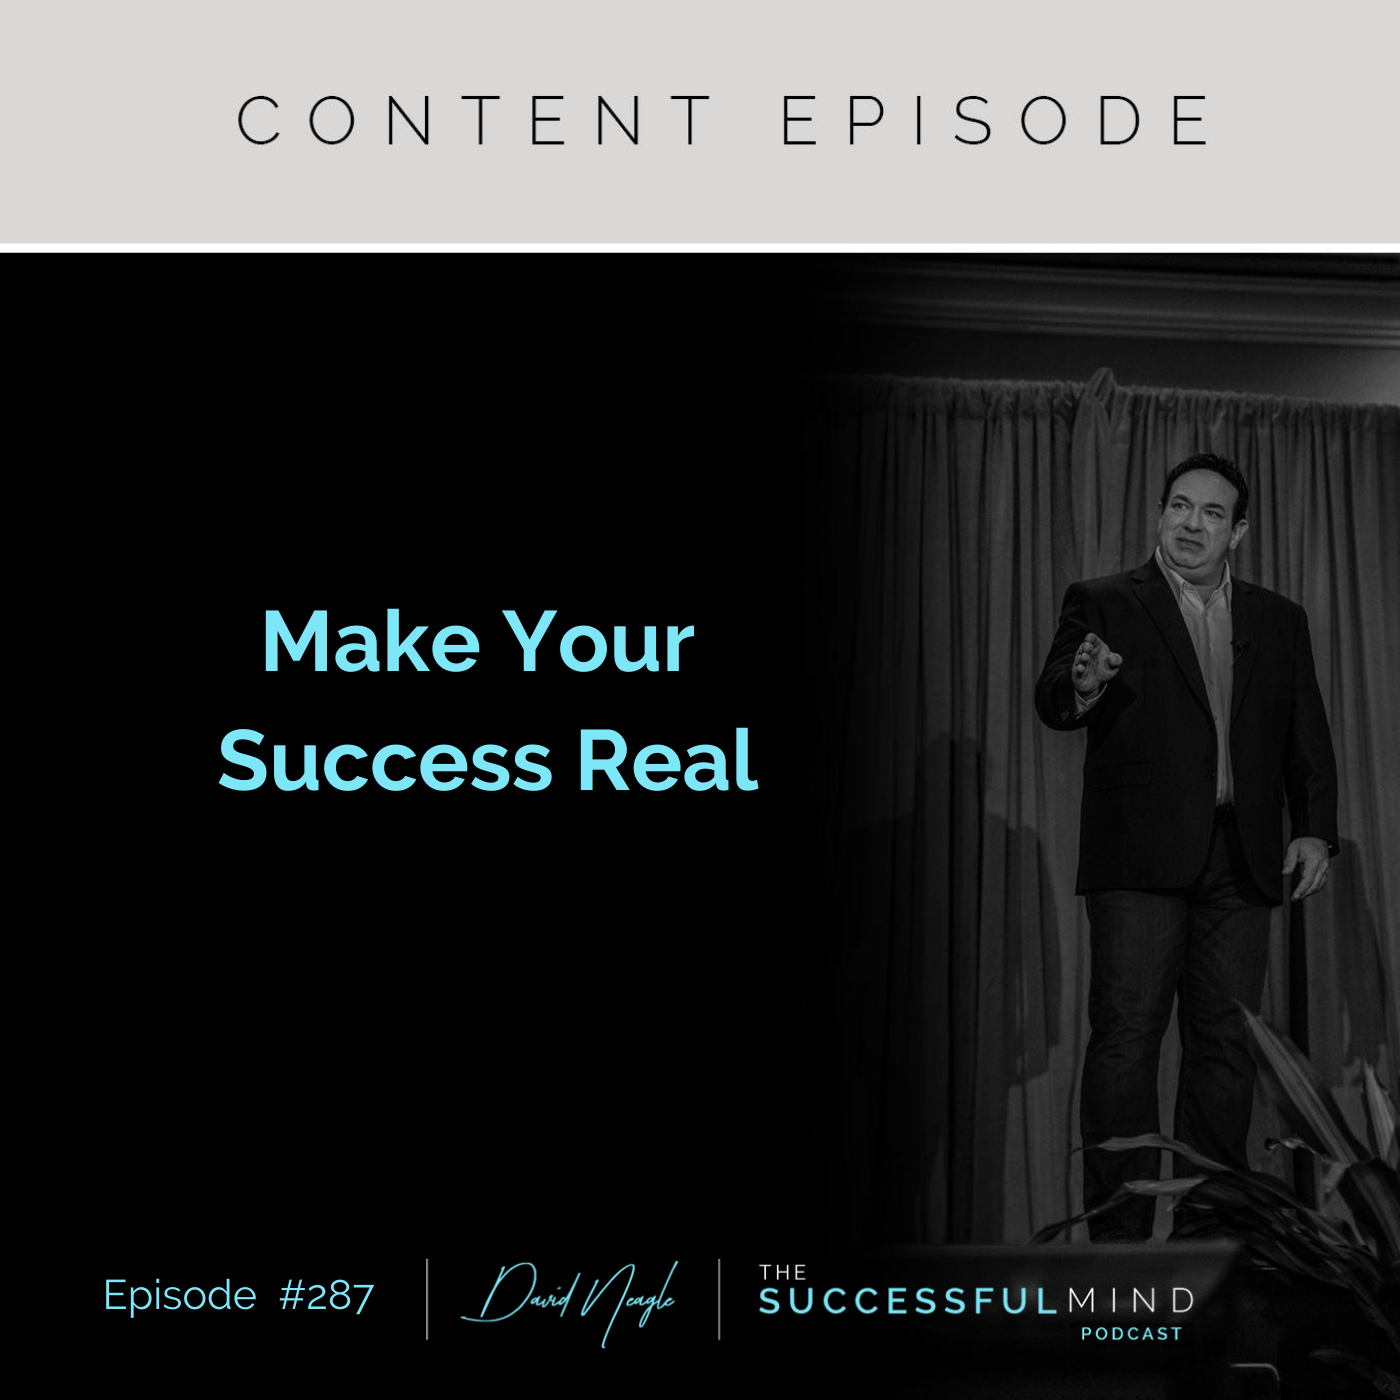 The Successful Mind Podcast - Make Your Success Real